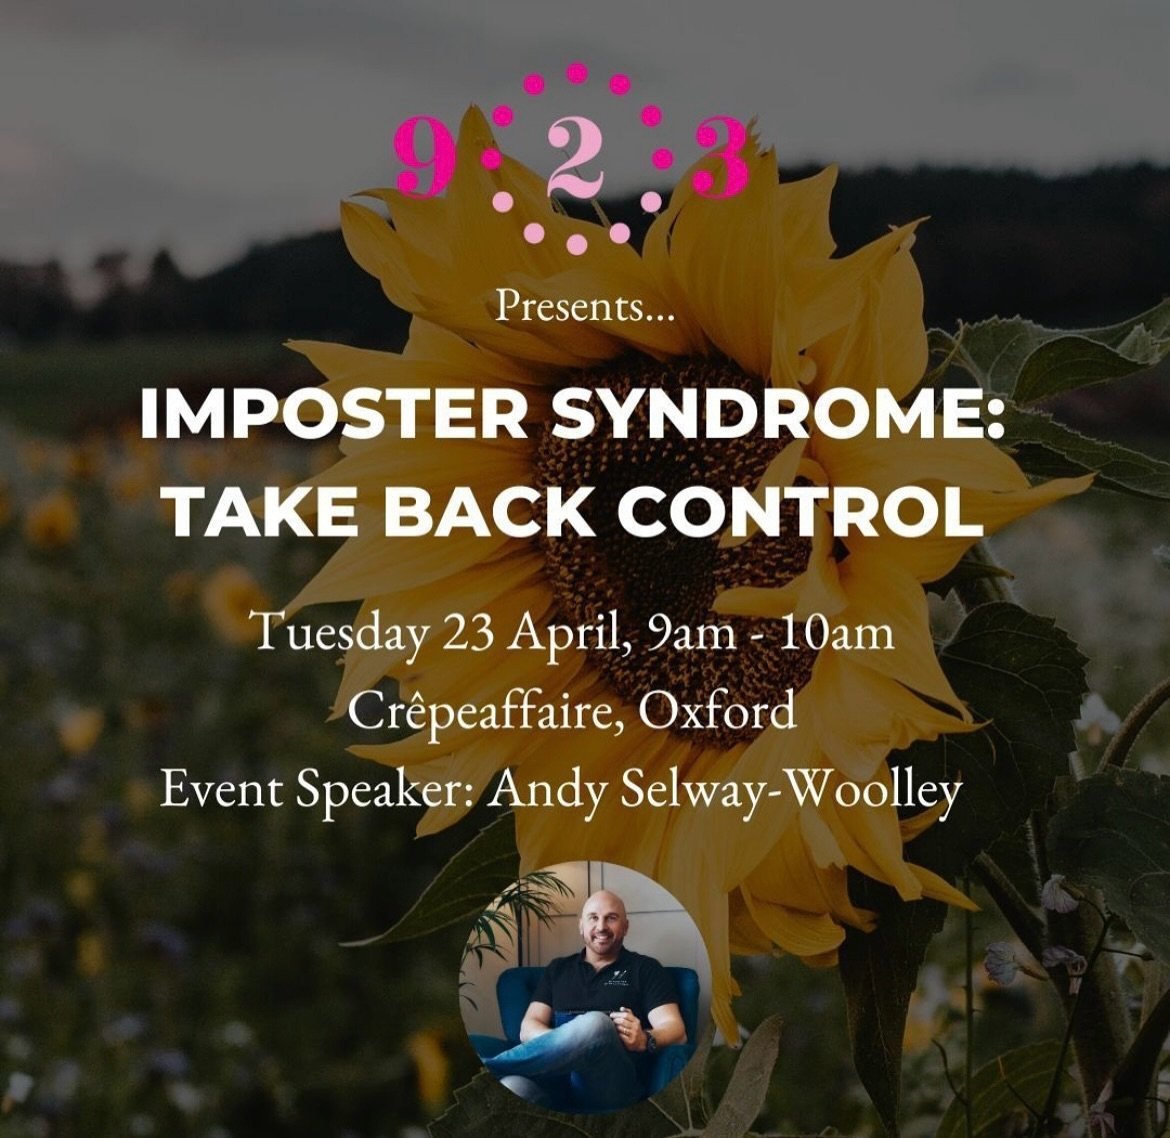 IMPOSTER SYNDROME EVENT 📣

Imposter Syndrome. Let&rsquo;s face it - we all have a touch of it. It can make even the most talented and hard-working professionals doubt themselves. But it doesn&rsquo;t have to be this way...

Come join me and @923jobs